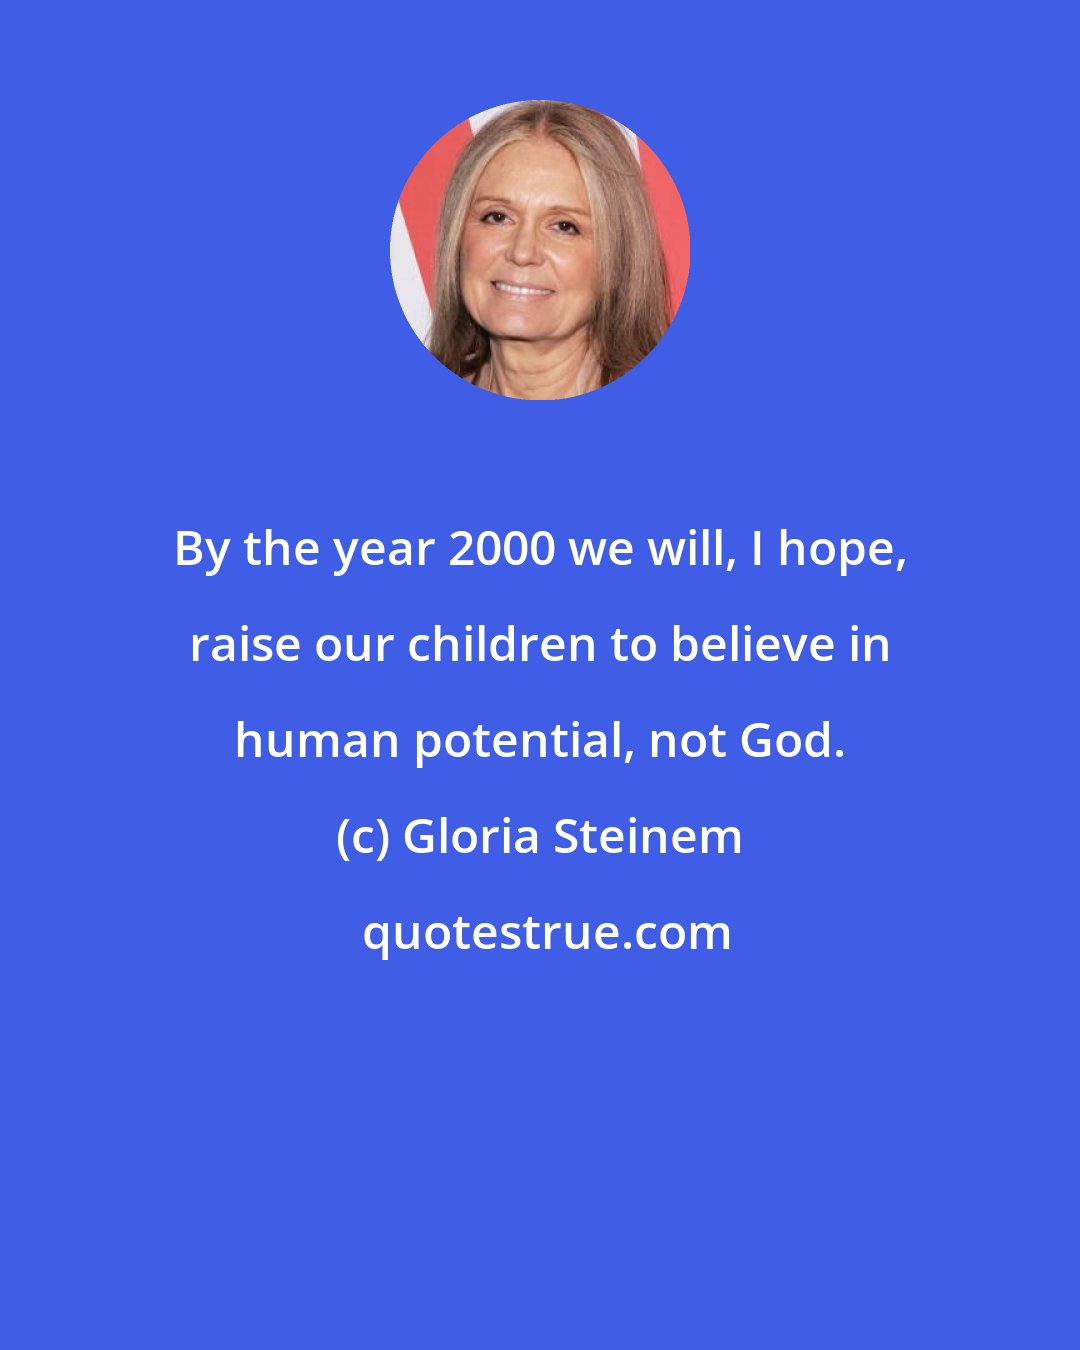 Gloria Steinem: By the year 2000 we will, I hope, raise our children to believe in human potential, not God.